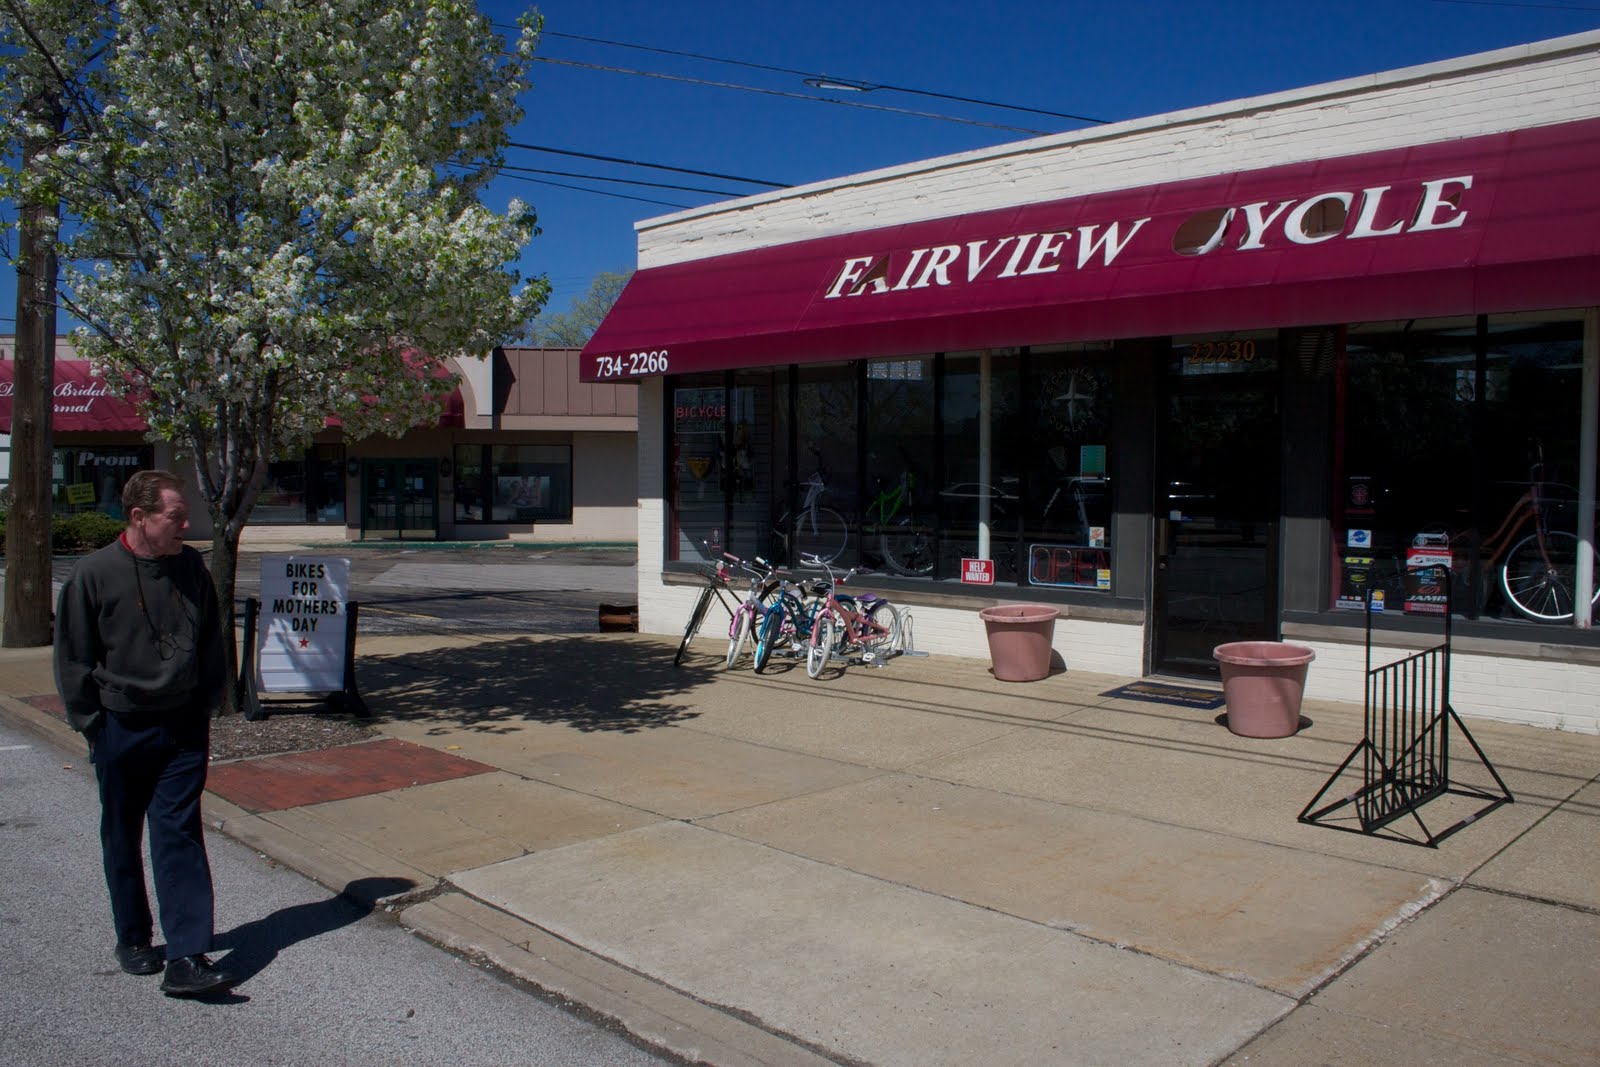 Izip Road Trip: Fairview Cycle - Fairview Park, OH1600 x 1067